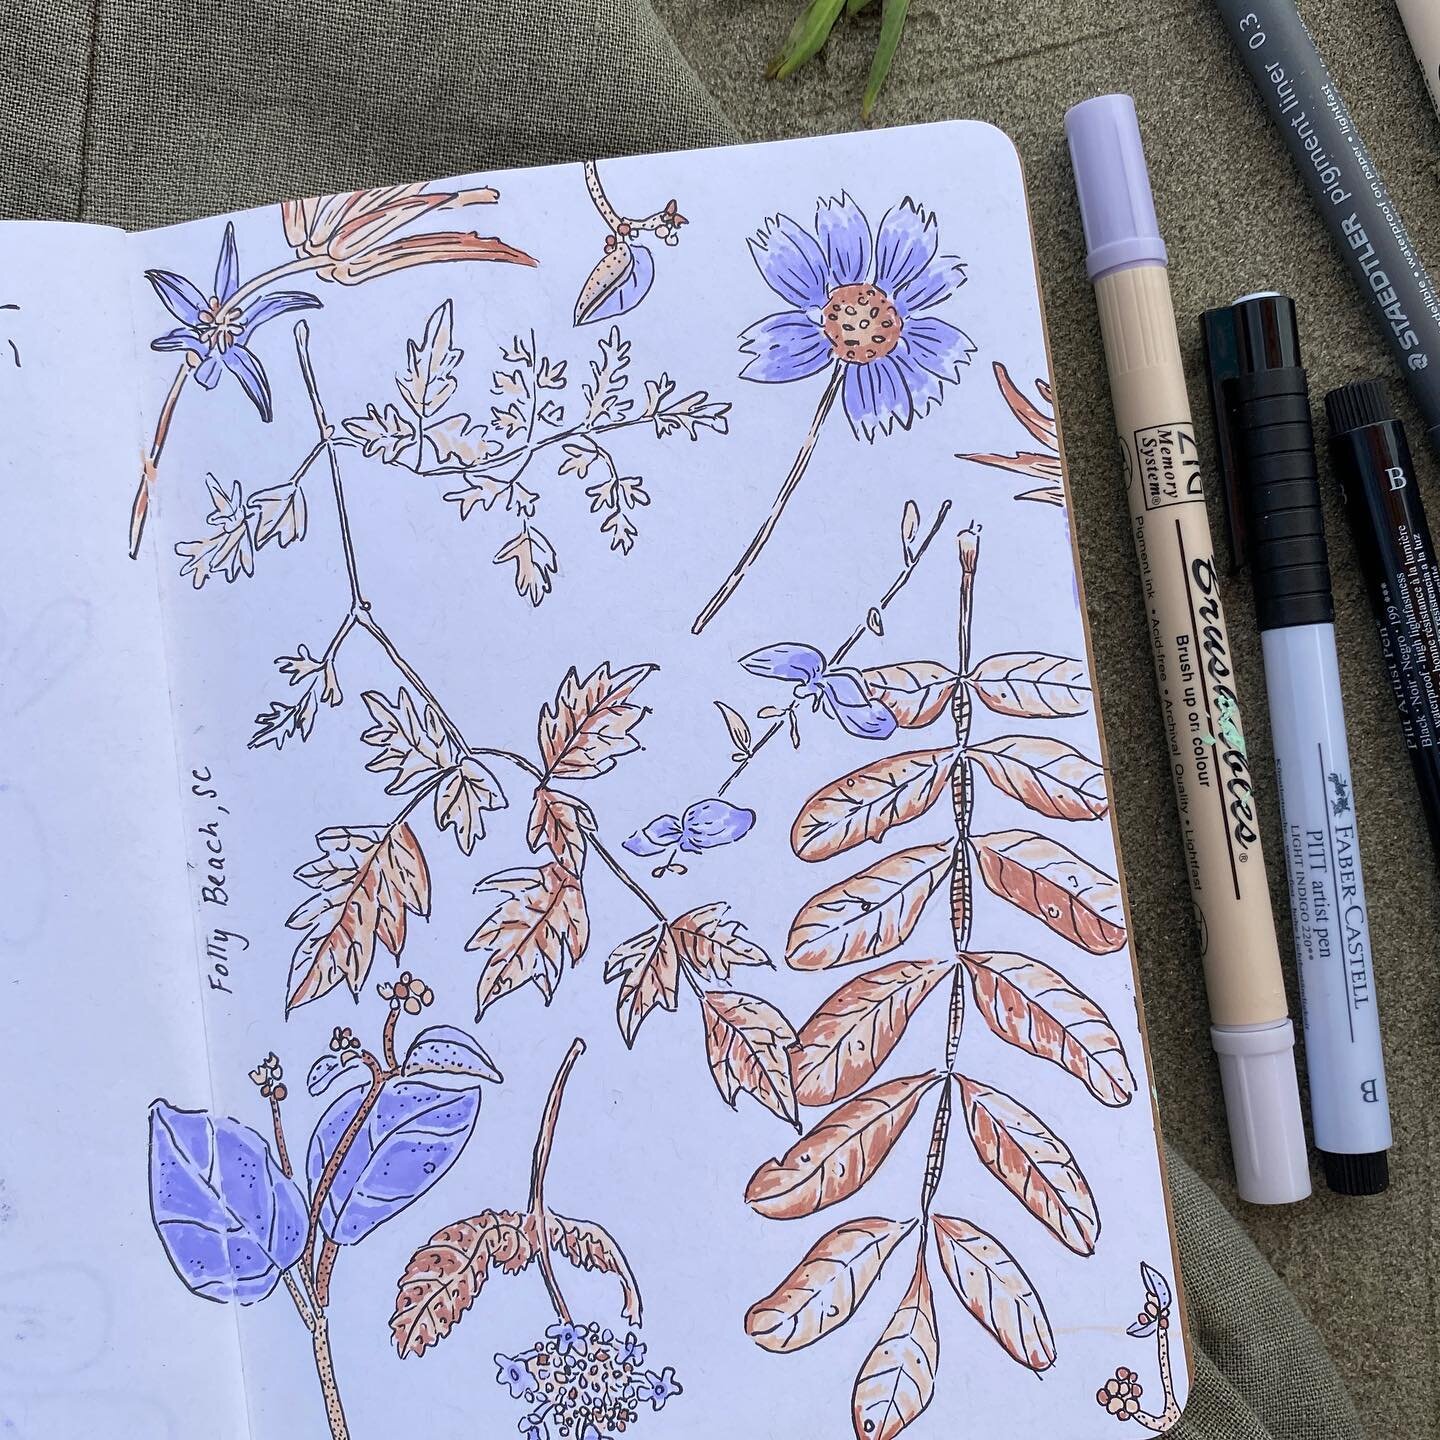 Got in a few rare, quiet, toddler-free moments on vacation to sketch some local plants and weeds 🌿
.
.
.
#floral #pattern #drawing #textiles #illustration